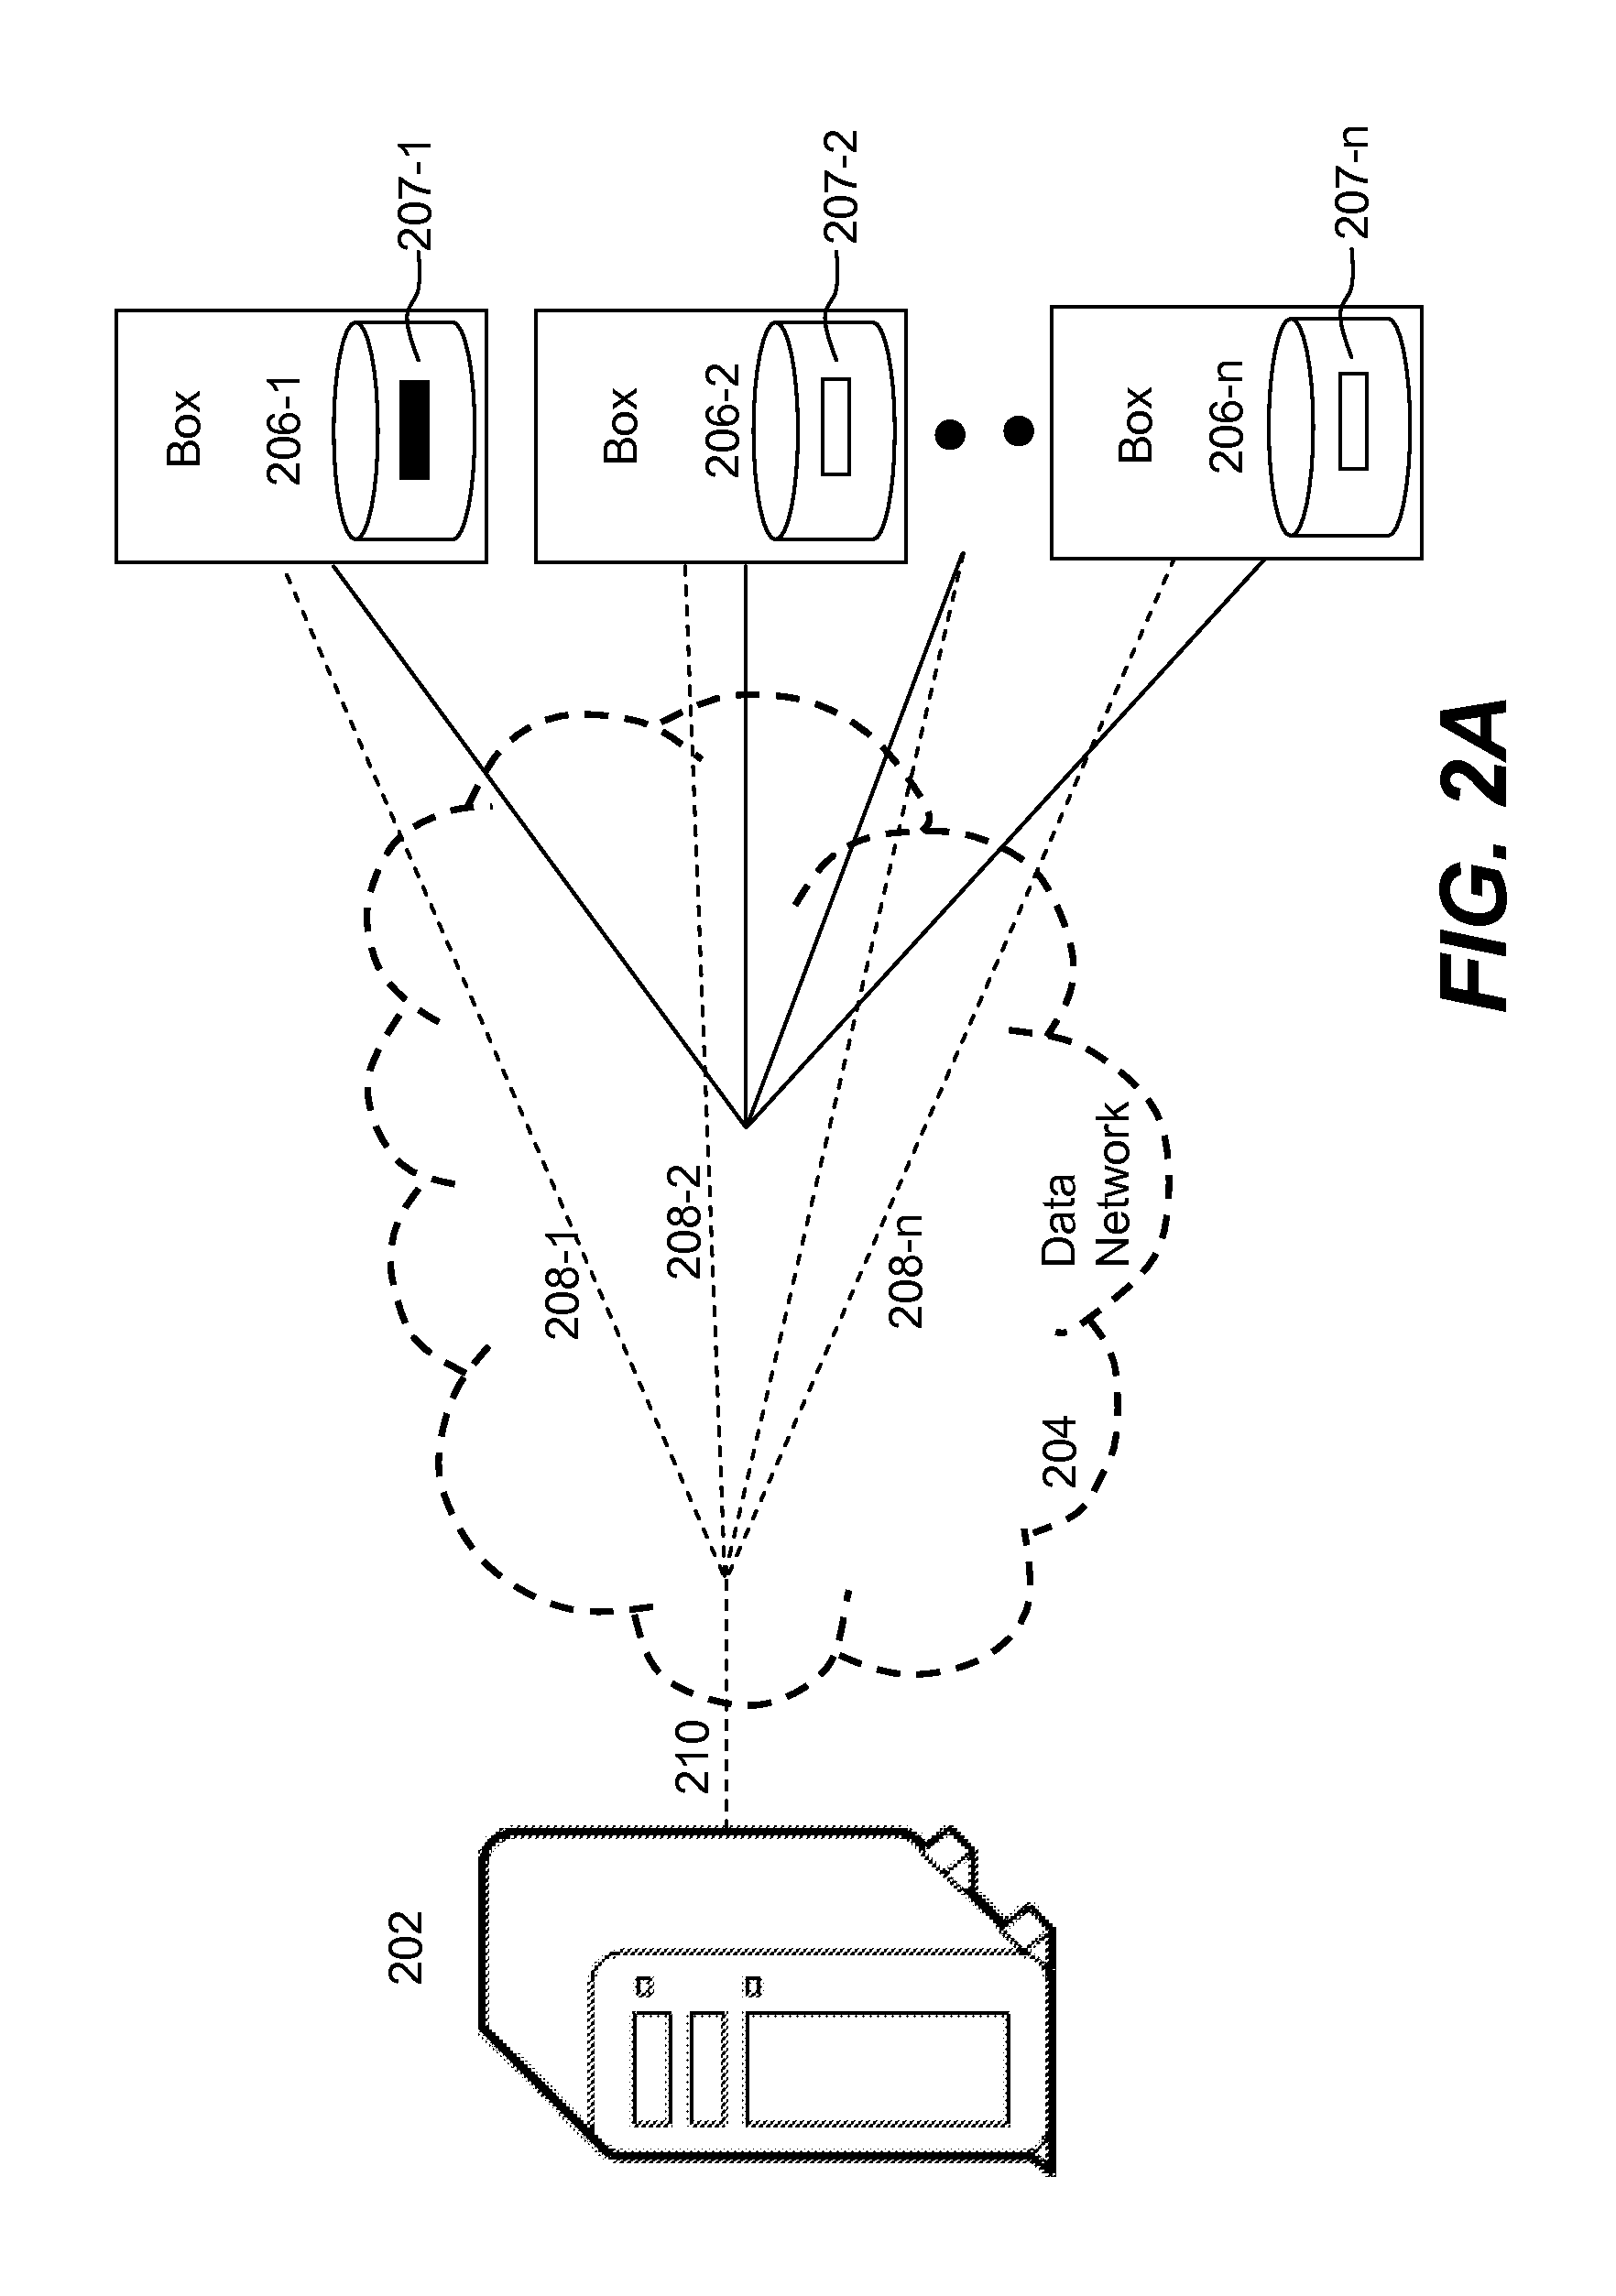 Method and system for providing instantaneous media-on-demand services by transmitting contents in pieces from client machines